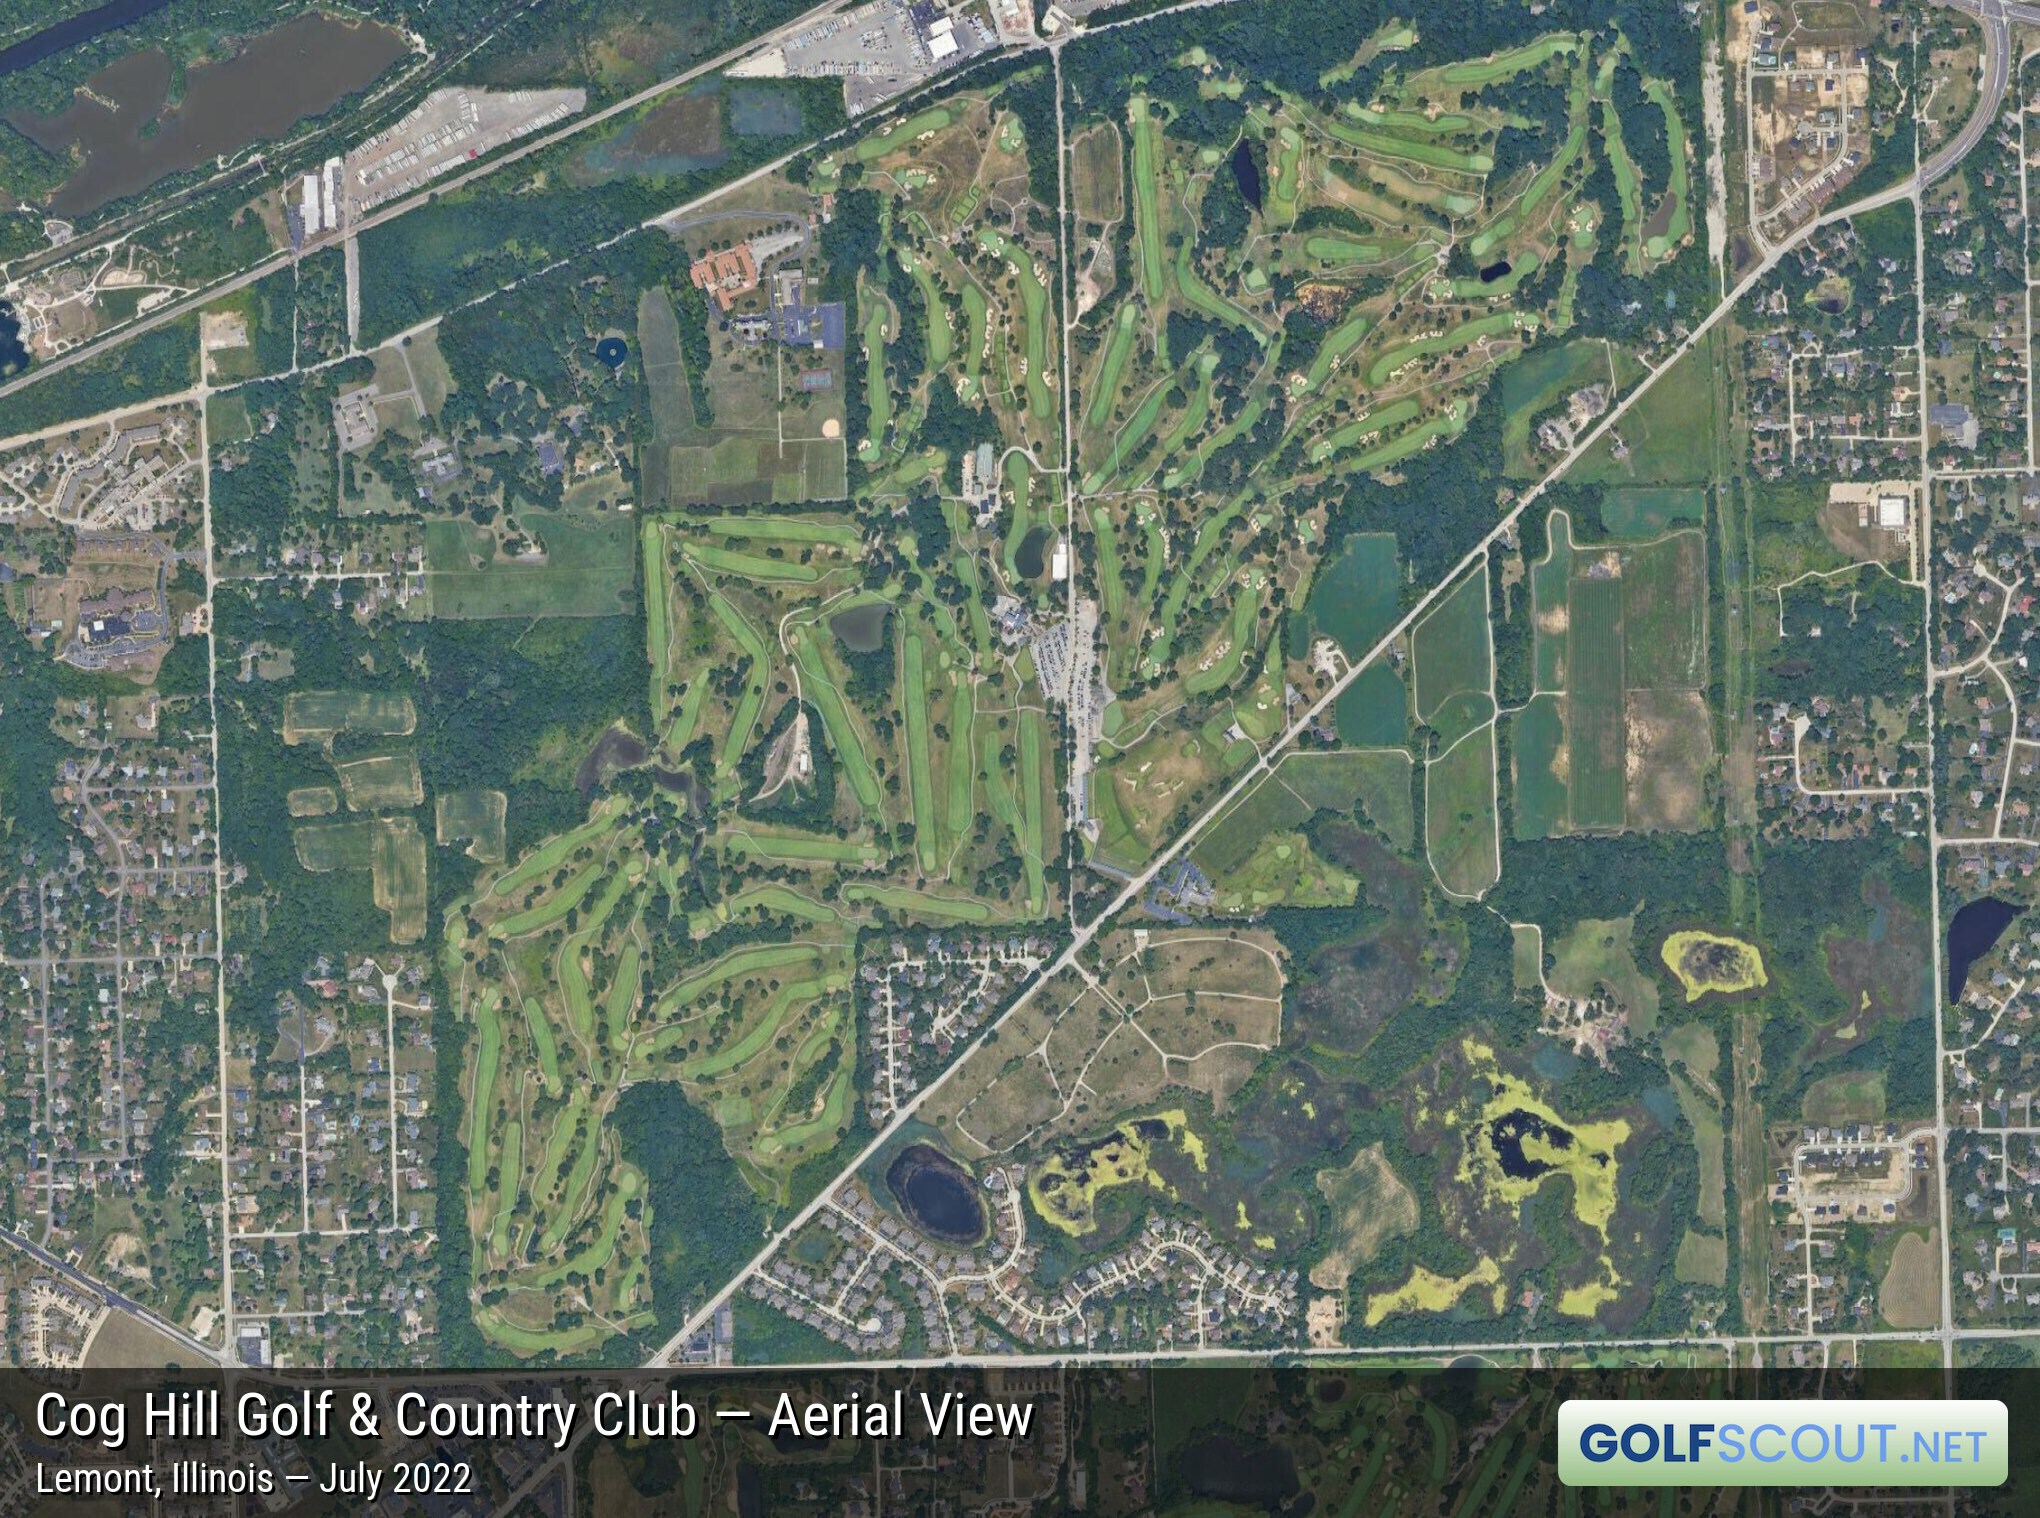 Aerial satellite imagery of Cog Hill Course #1 in Lemont, Illinois. Cog Hill has 4 courses. Course 1 and 3 intertwine in the southwest portion of the property. Image courtesy of Google Maps.